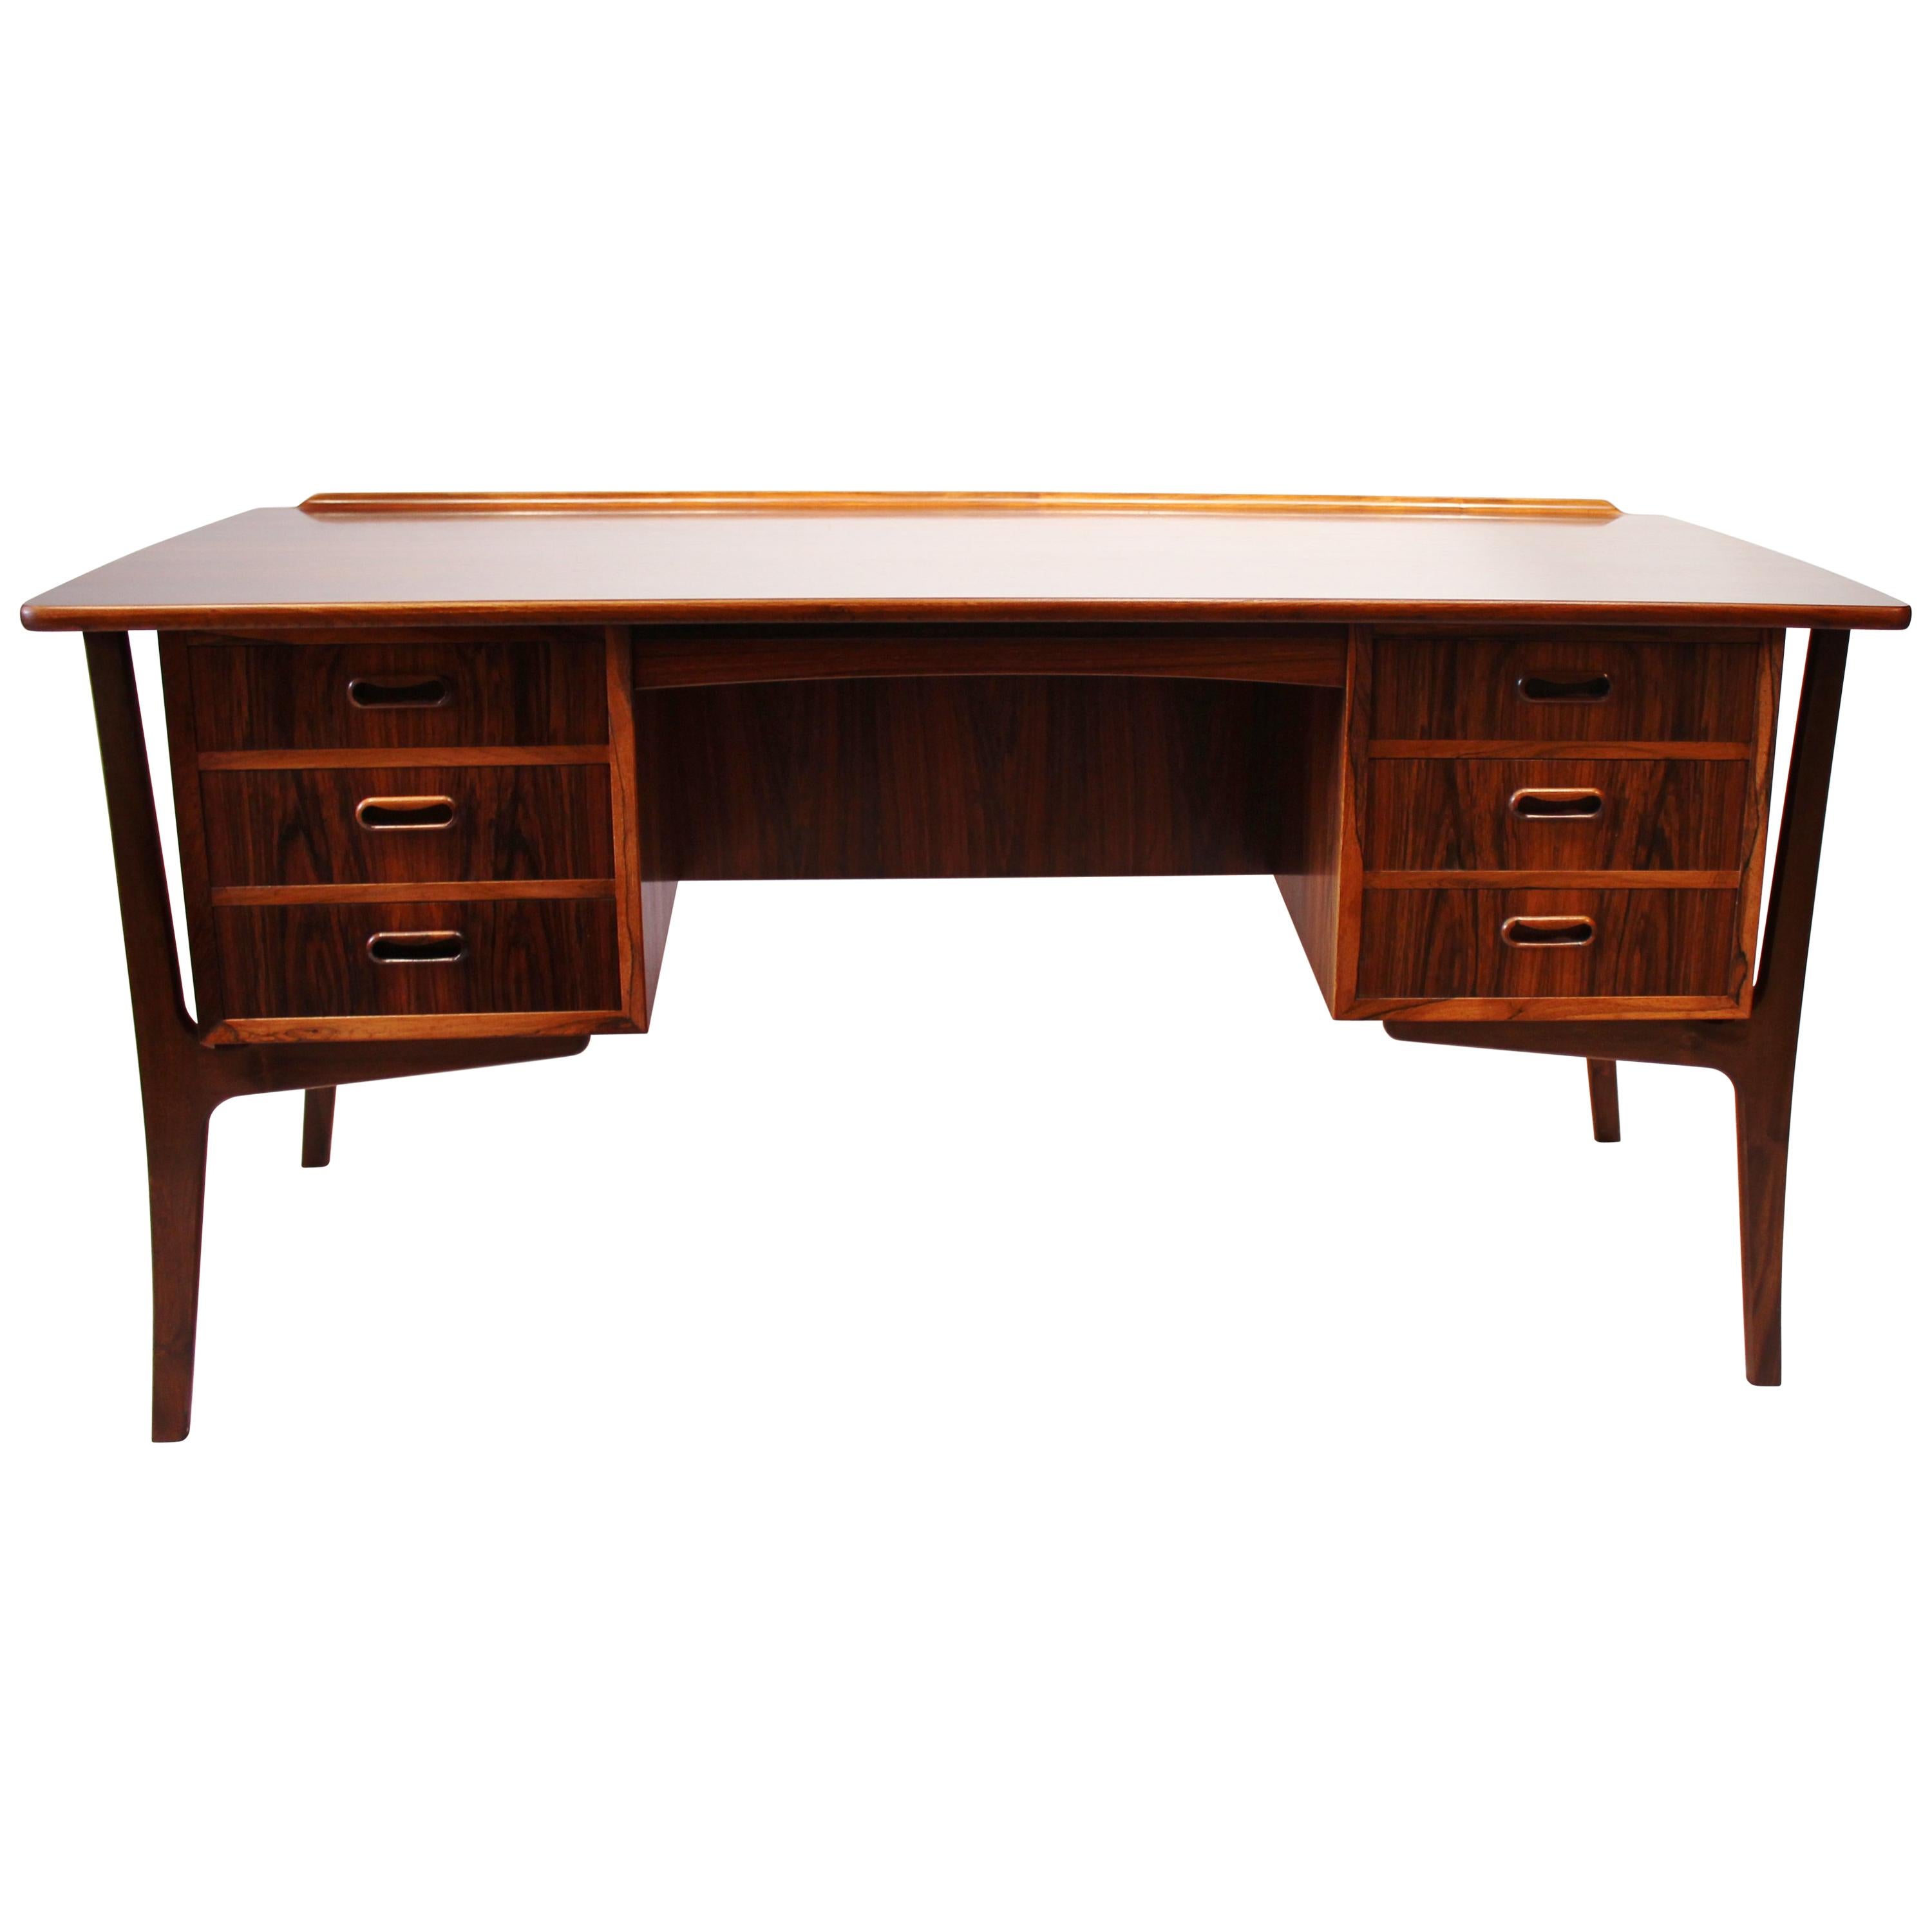 Desk in Rosewood by Svend Aage Madsen from the 1960s